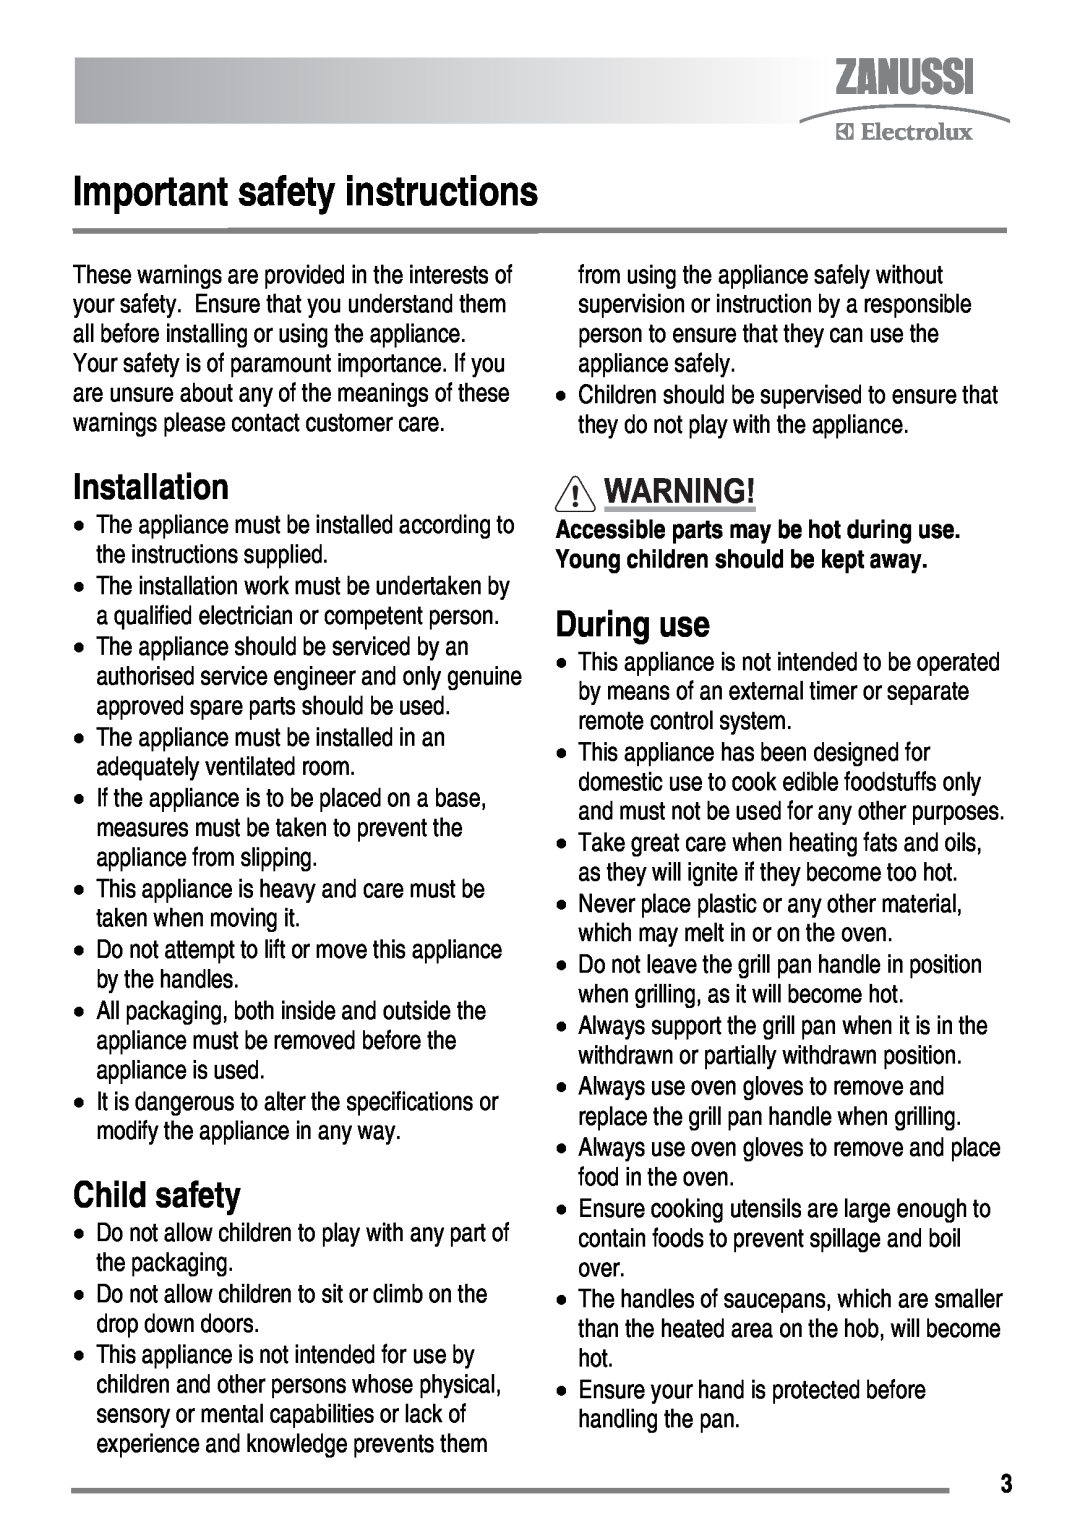 Zanussi ZKC6040 user manual Important safety instructions, Installation, Child safety, During use 